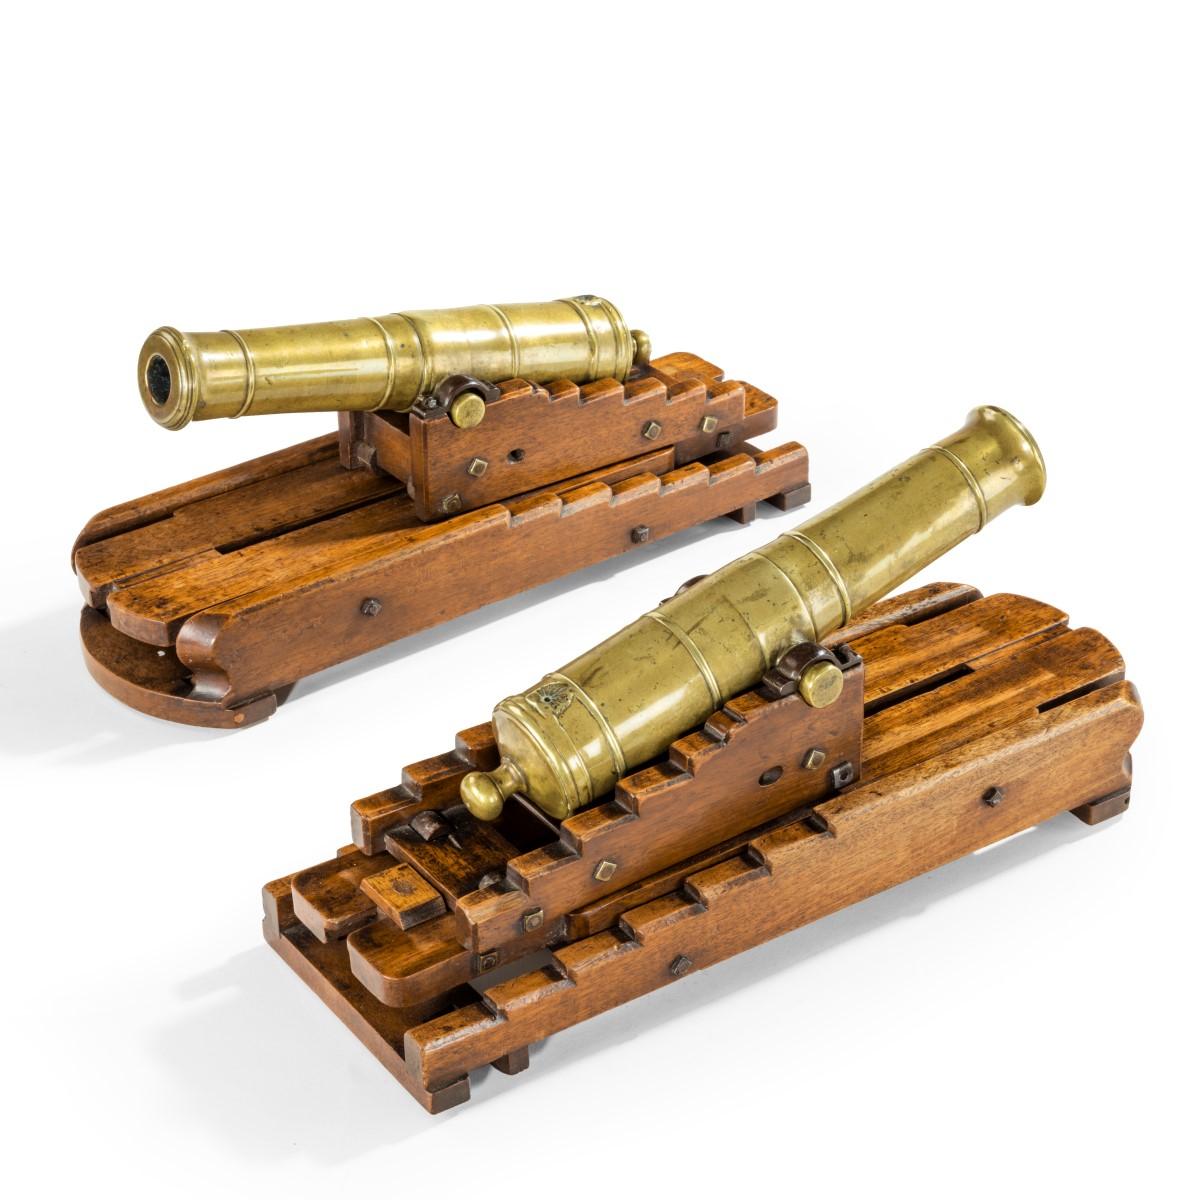 A very good pair of brass 19th century models of ship’s 32-pounder cannon, on stepped mahogany elevating carriages. English, circa 1840.